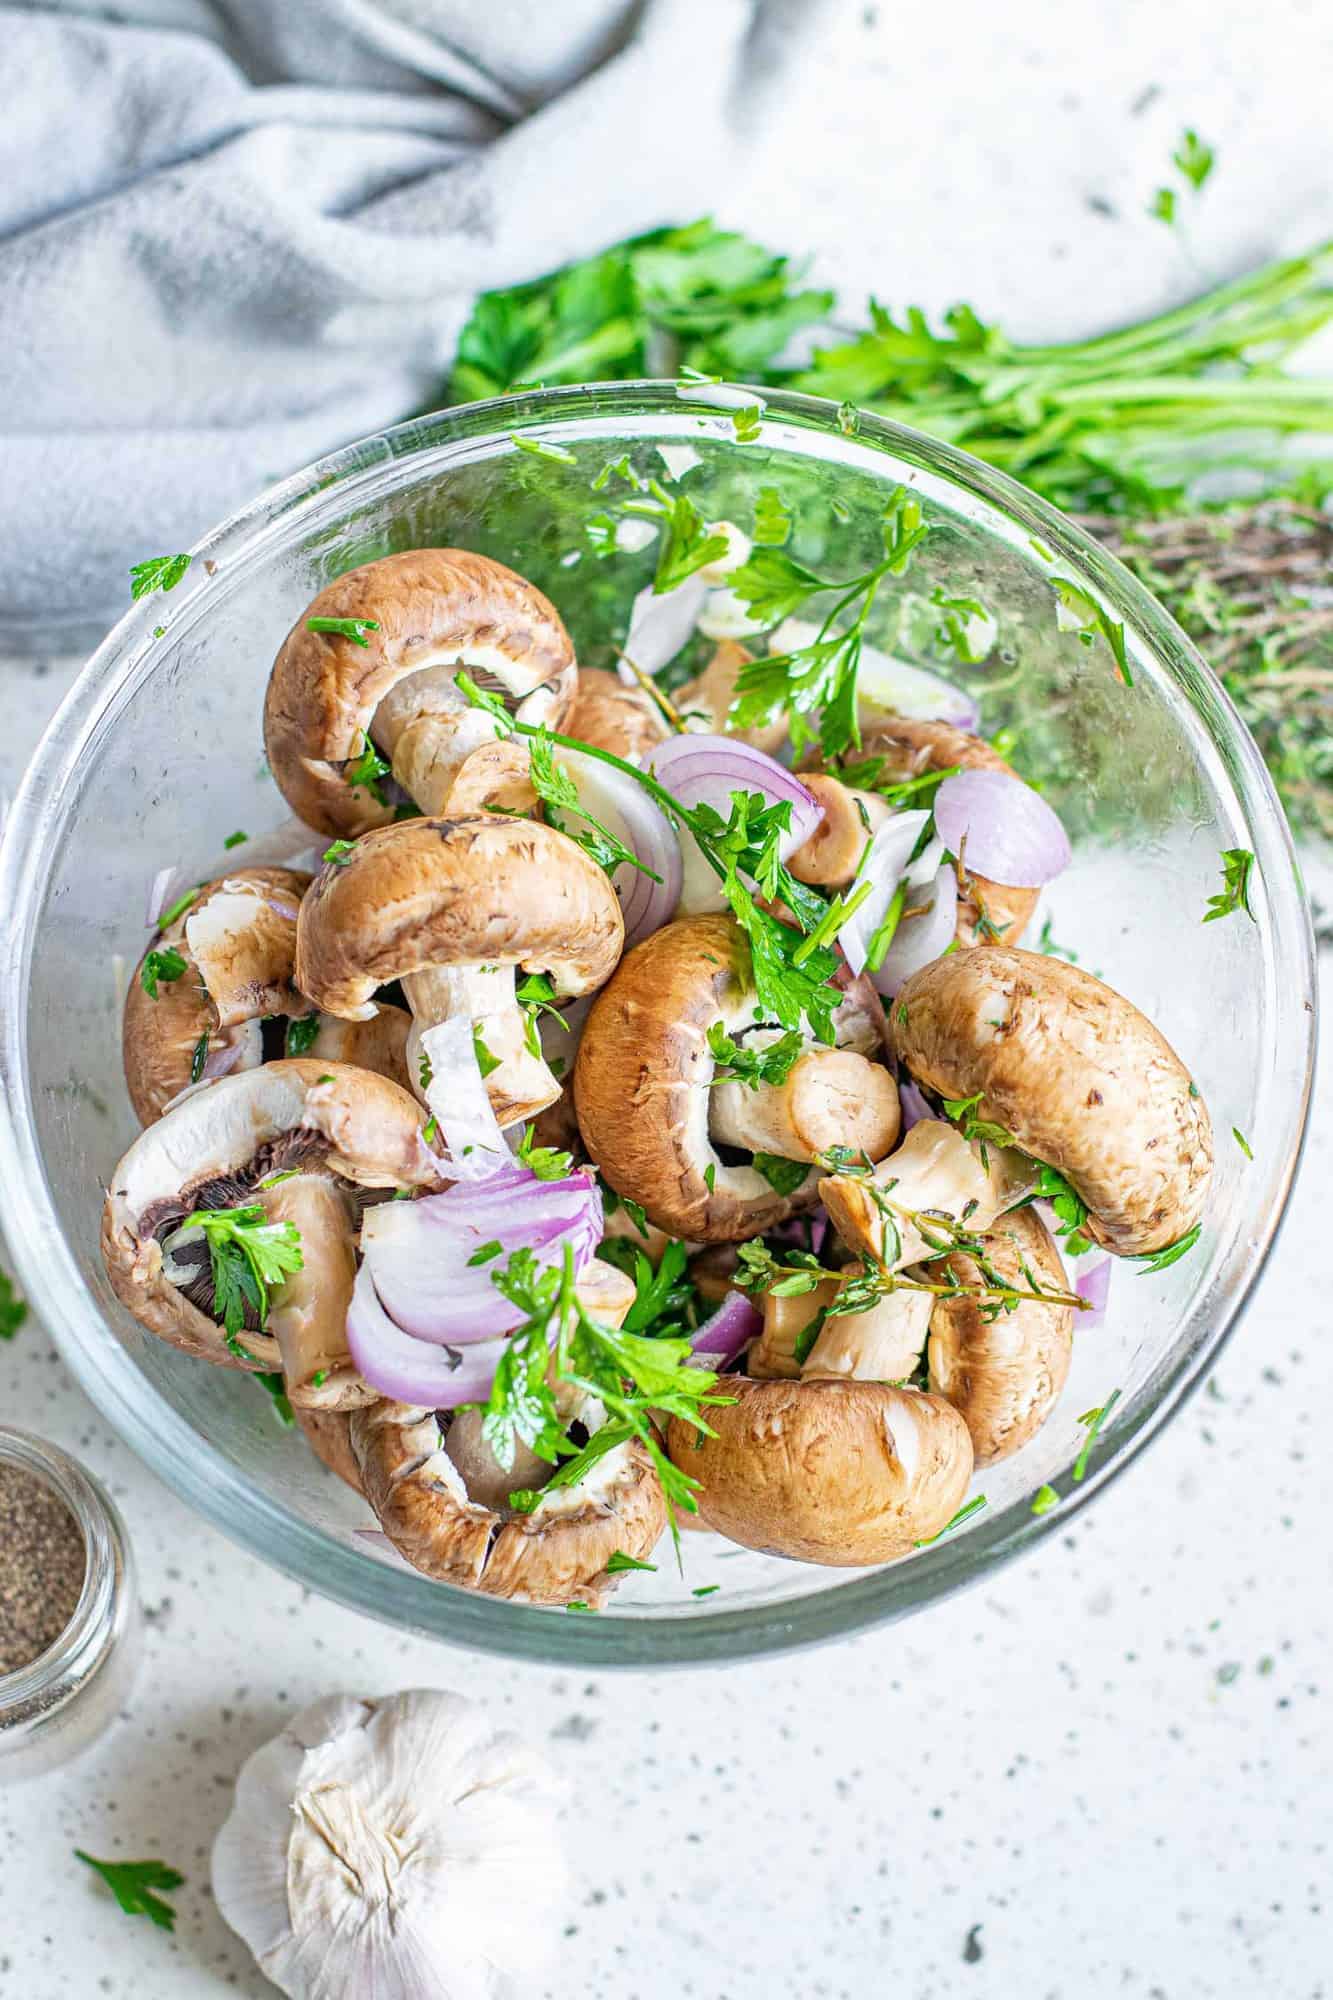 Uncooked mushrooms, shallot, garlic, and herbs in a bowl.